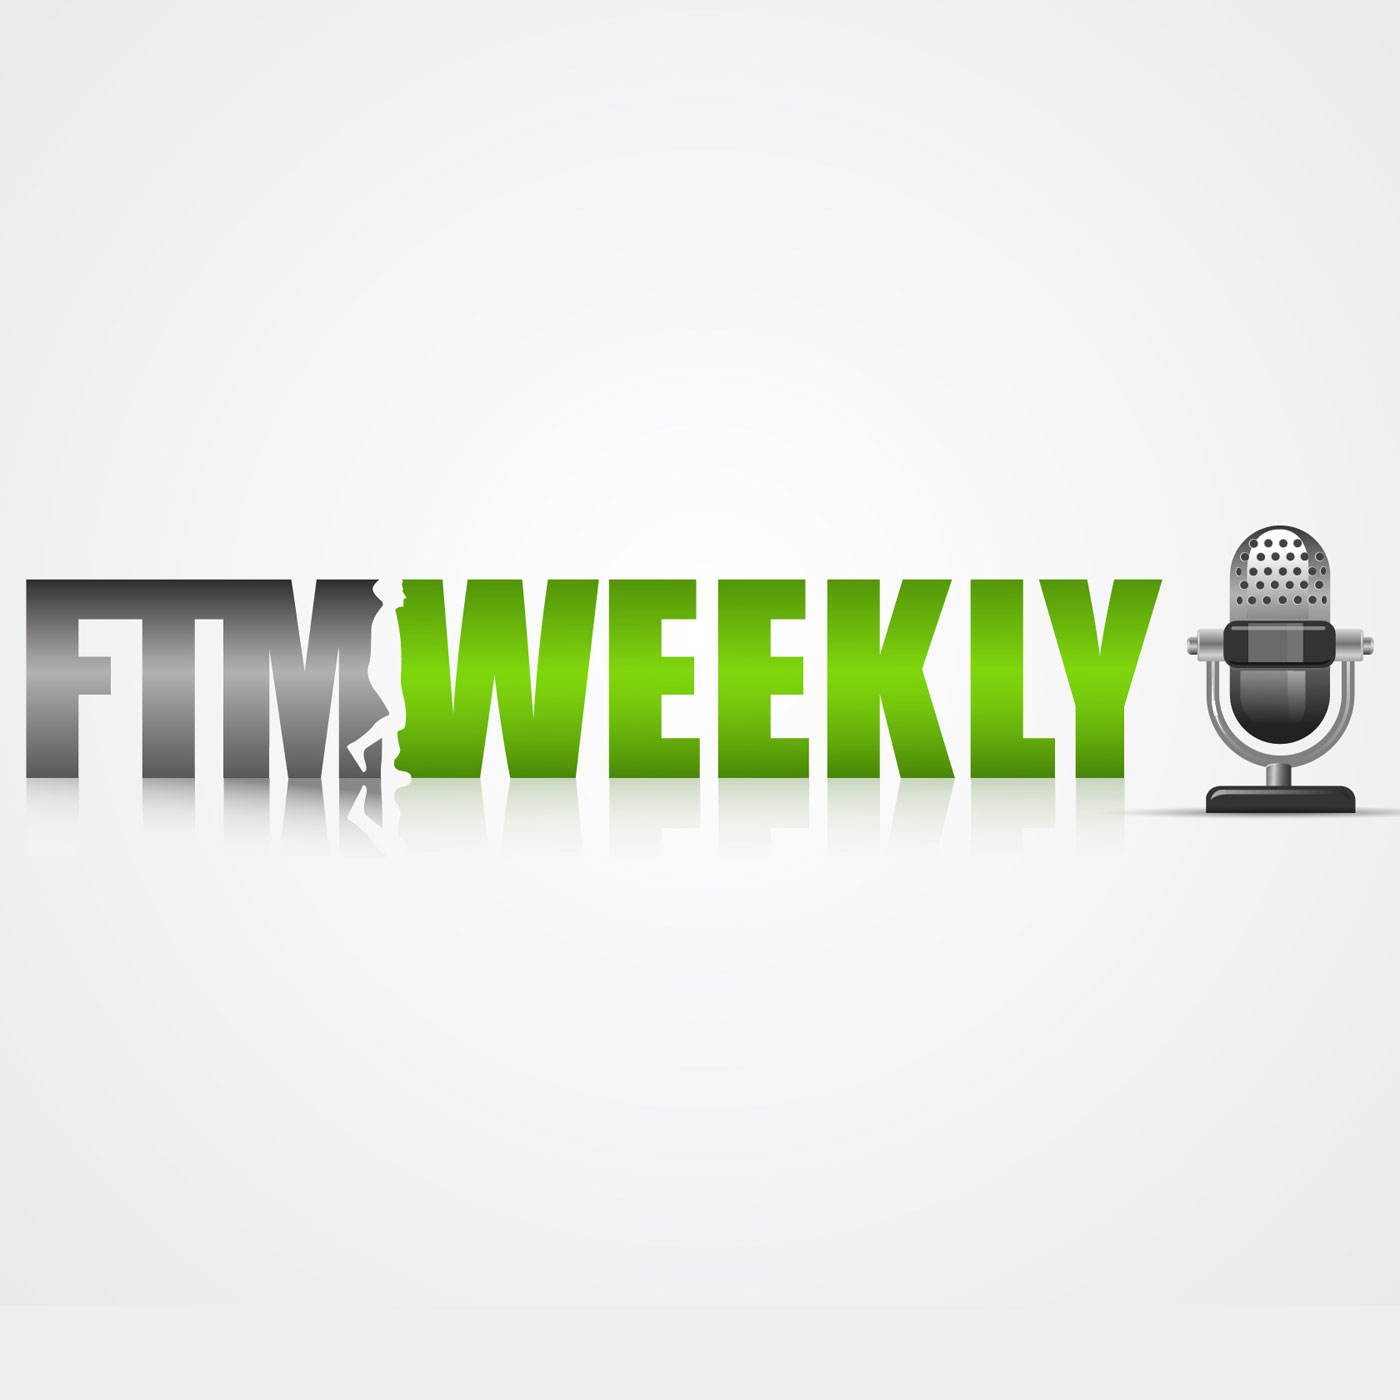 Follow the Money Weekly Podcast